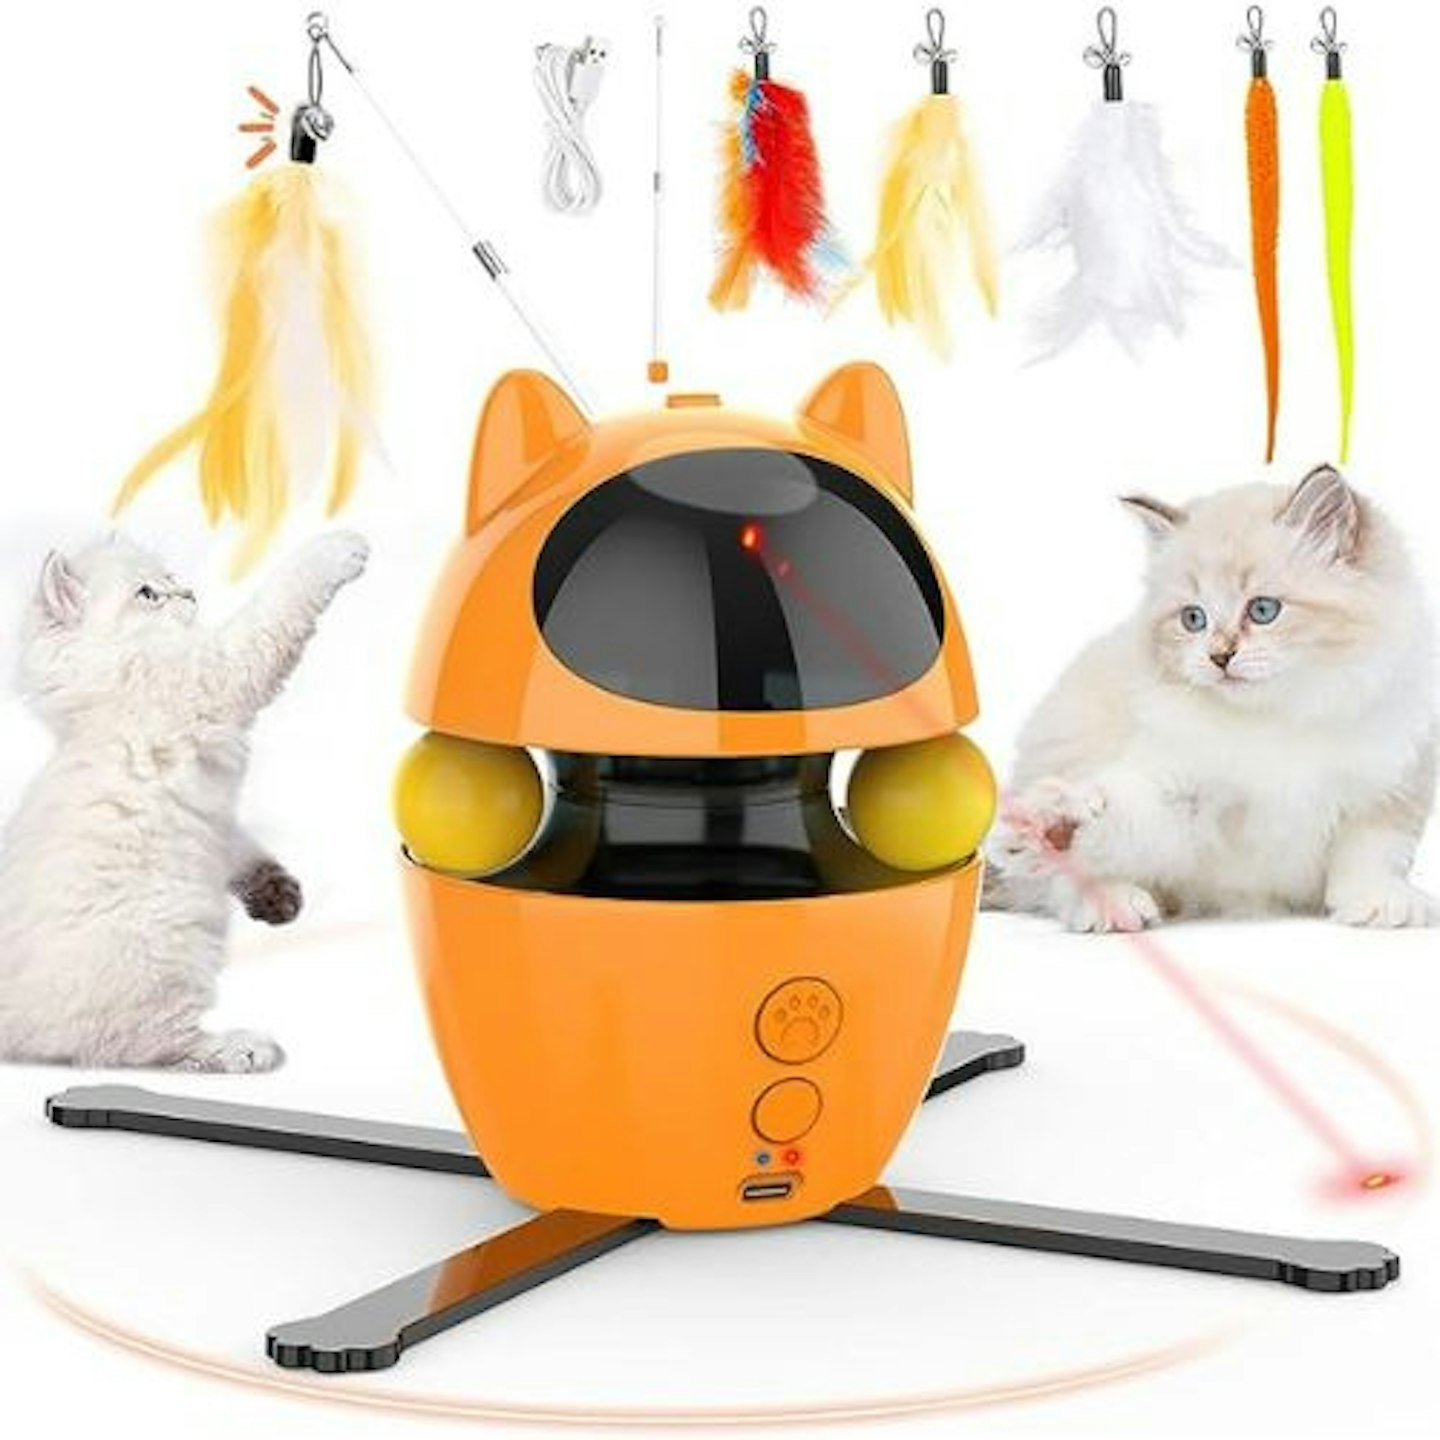 https://images.bauerhosting.com/marketing/sites/22/2023/09/Dreamon-3-in-1-Interactive-Cat-Toy.jpg?auto=format&w=1440&q=80